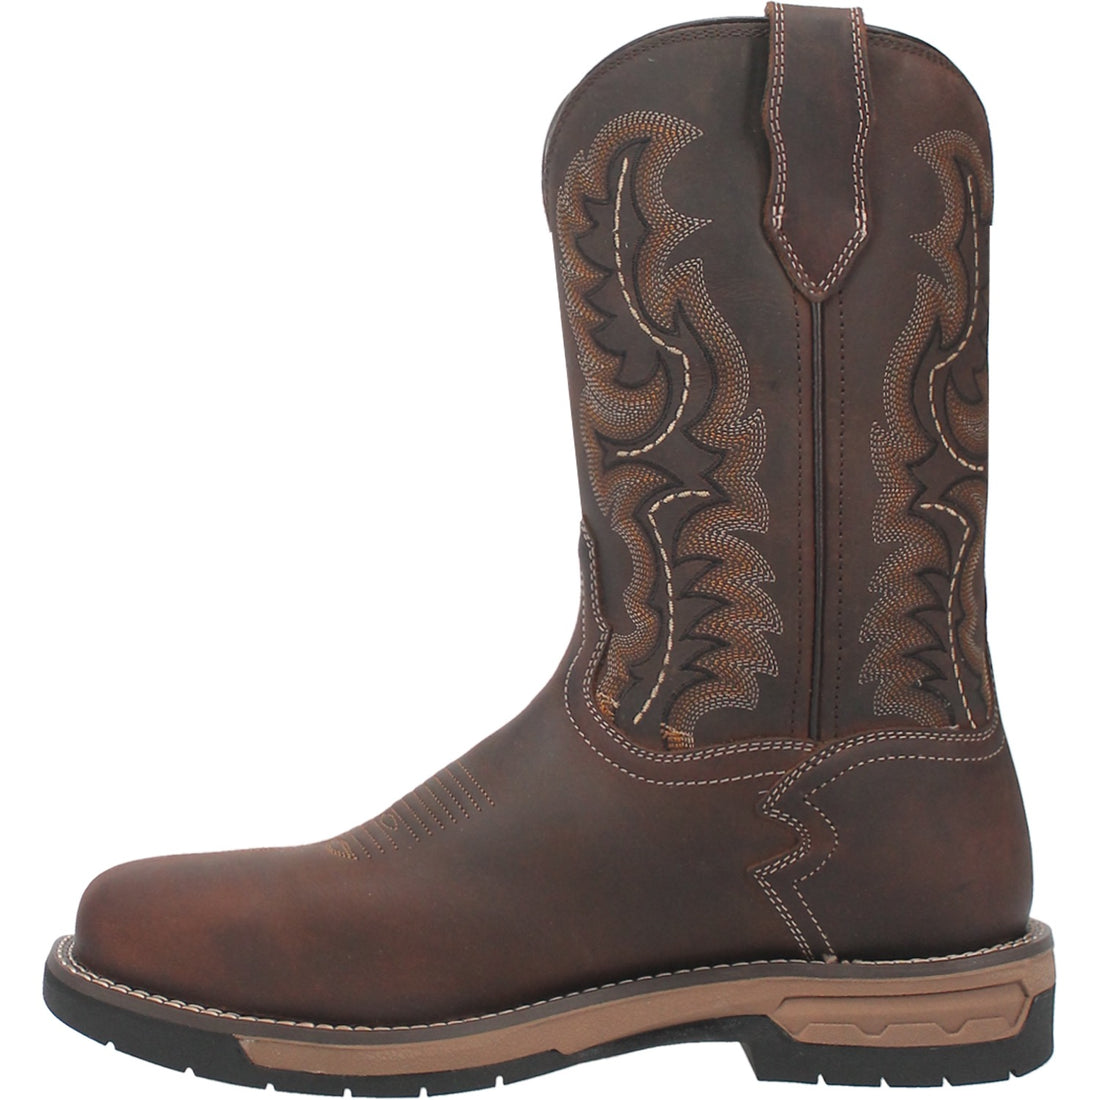 STRINGFELLOW STEEL TOE LEATHER BOOT Preview #3